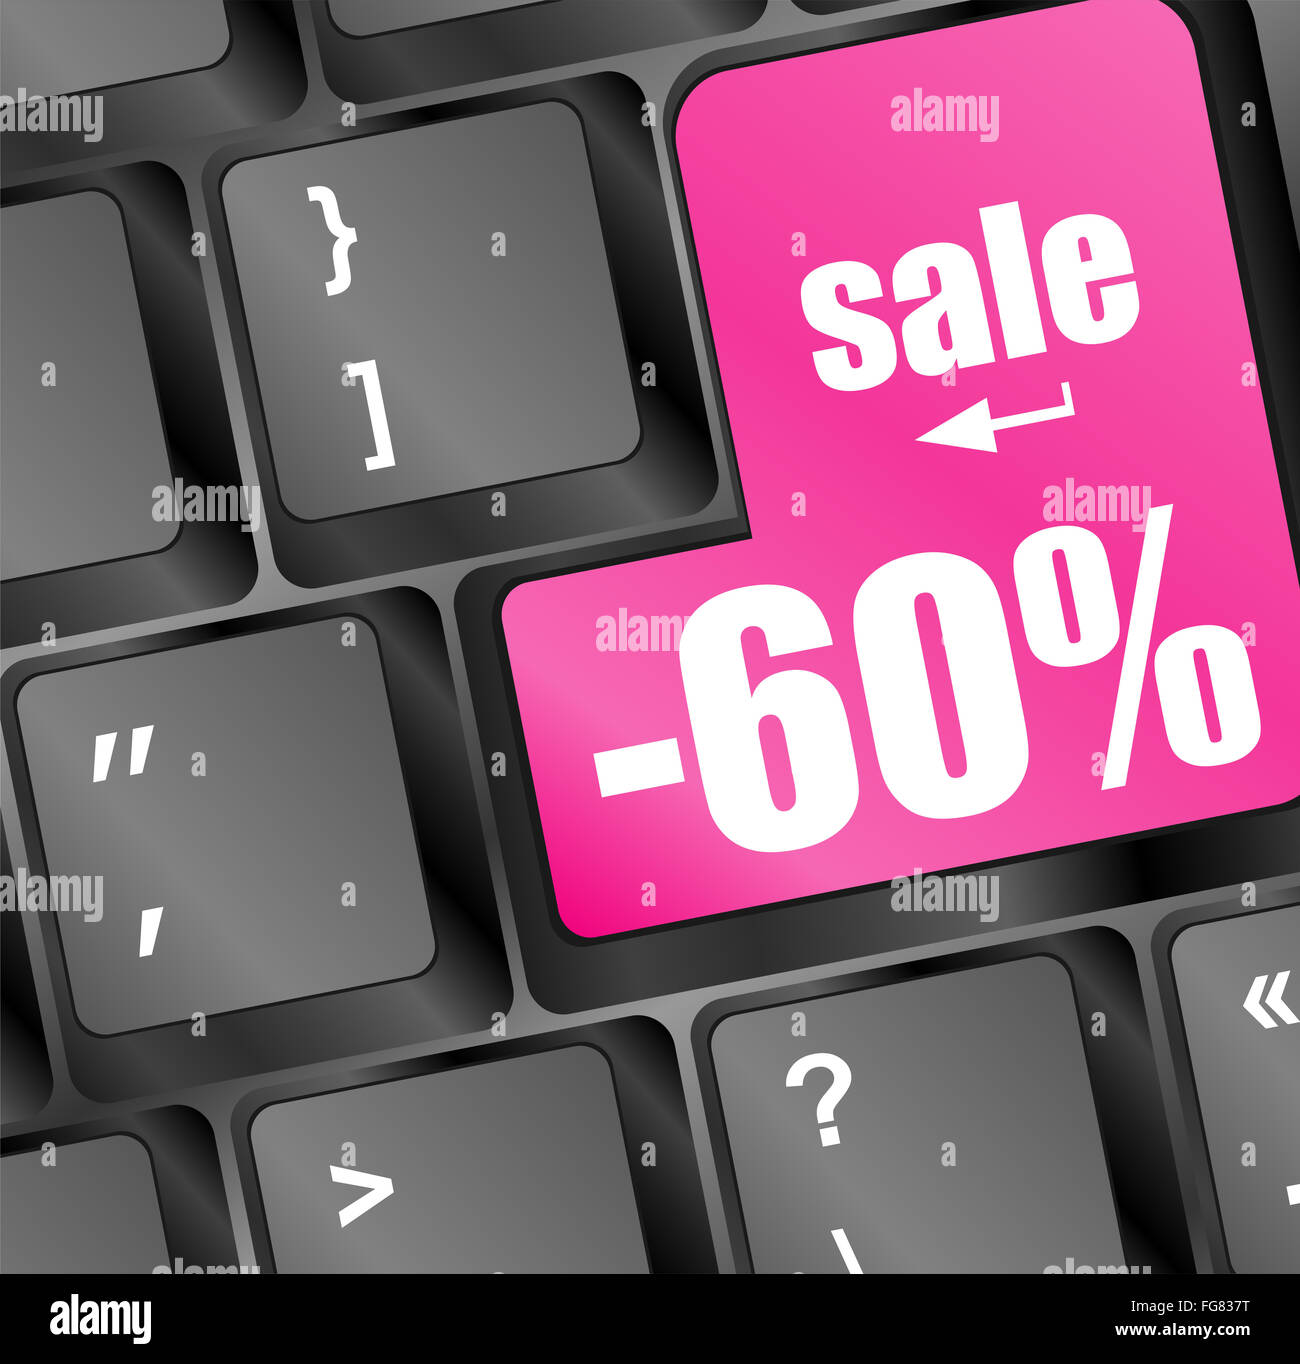 sale key in place of enter key on computer keyboard Stock Photo